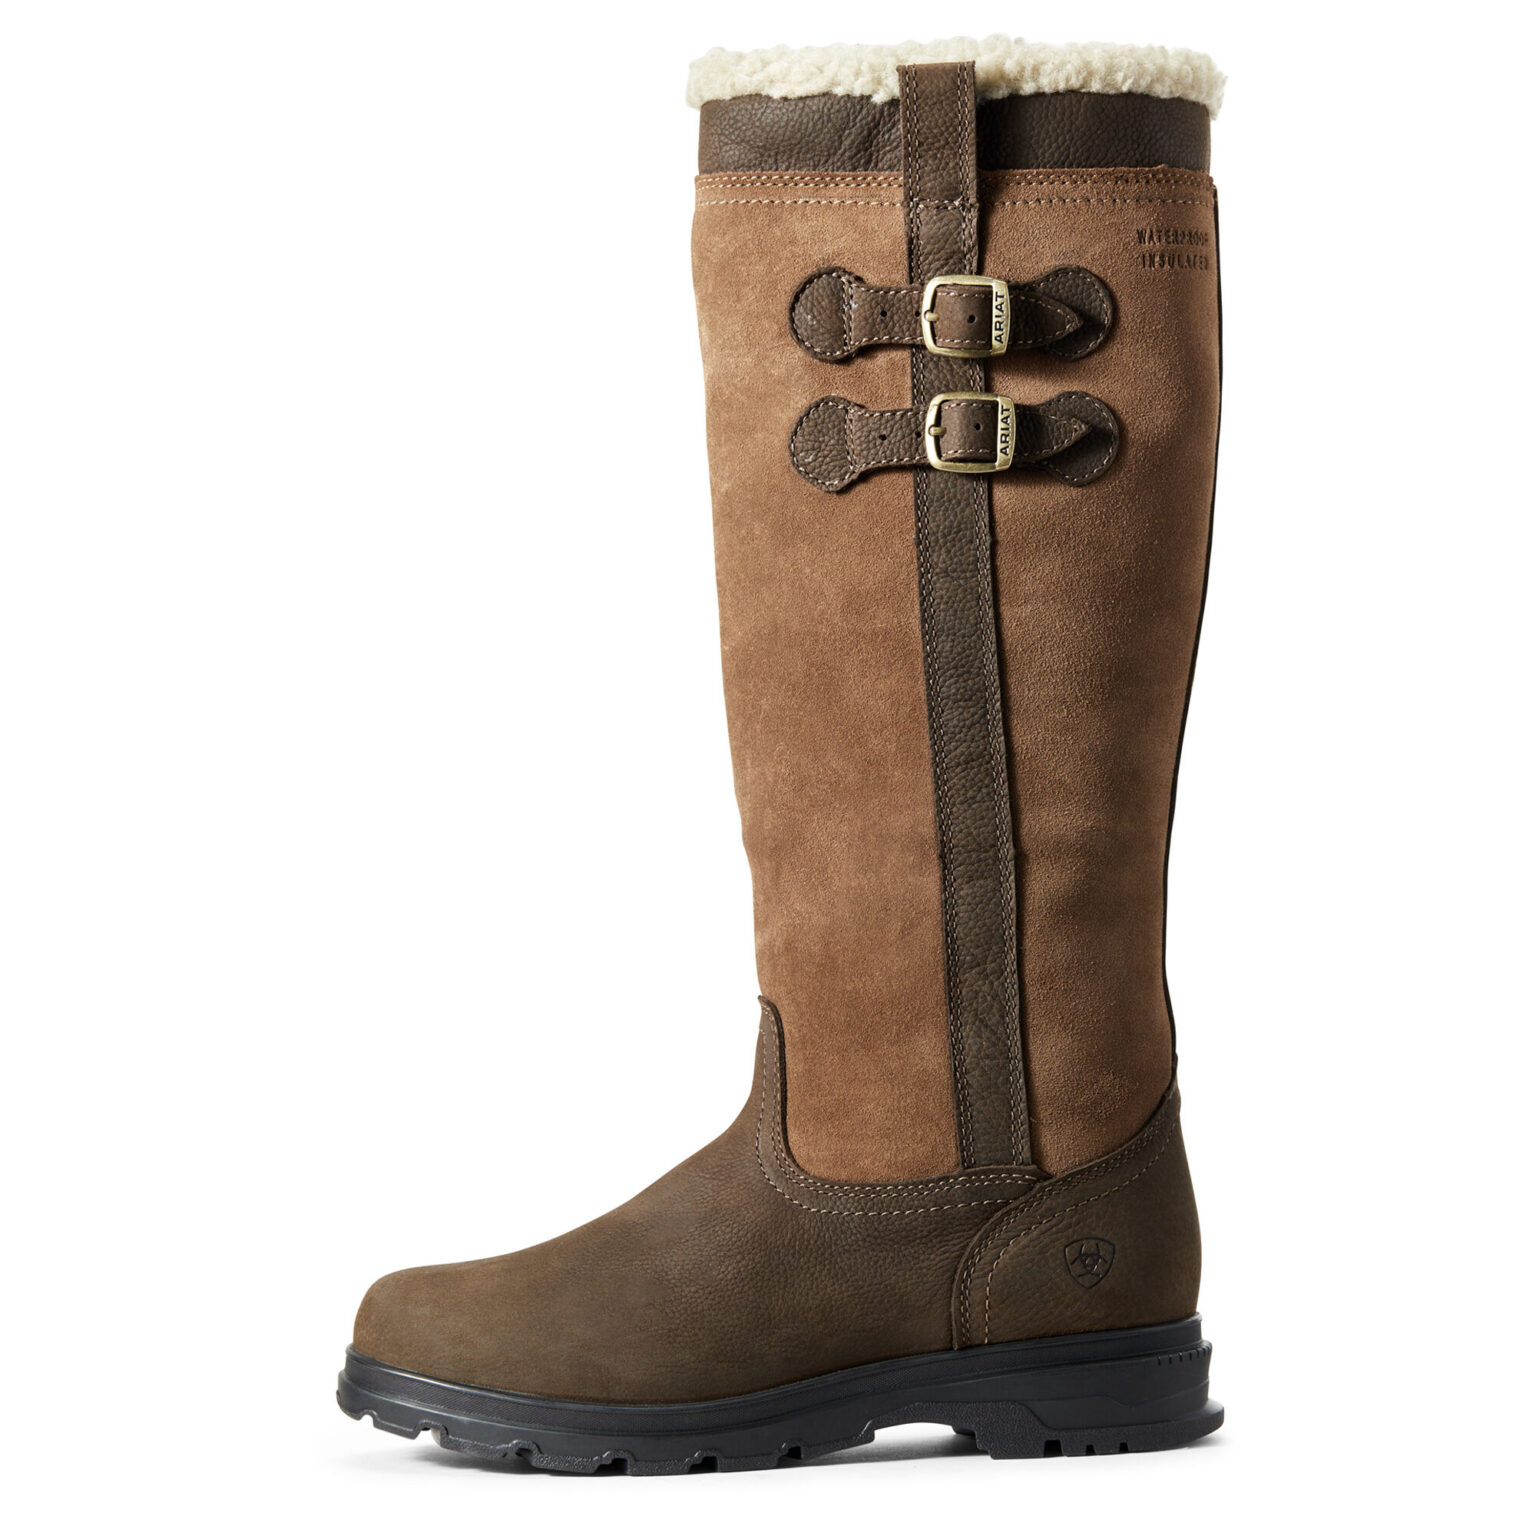 Ariat Eskdale Fur Waterproof Insulated Boot - The Keswick Boot Company